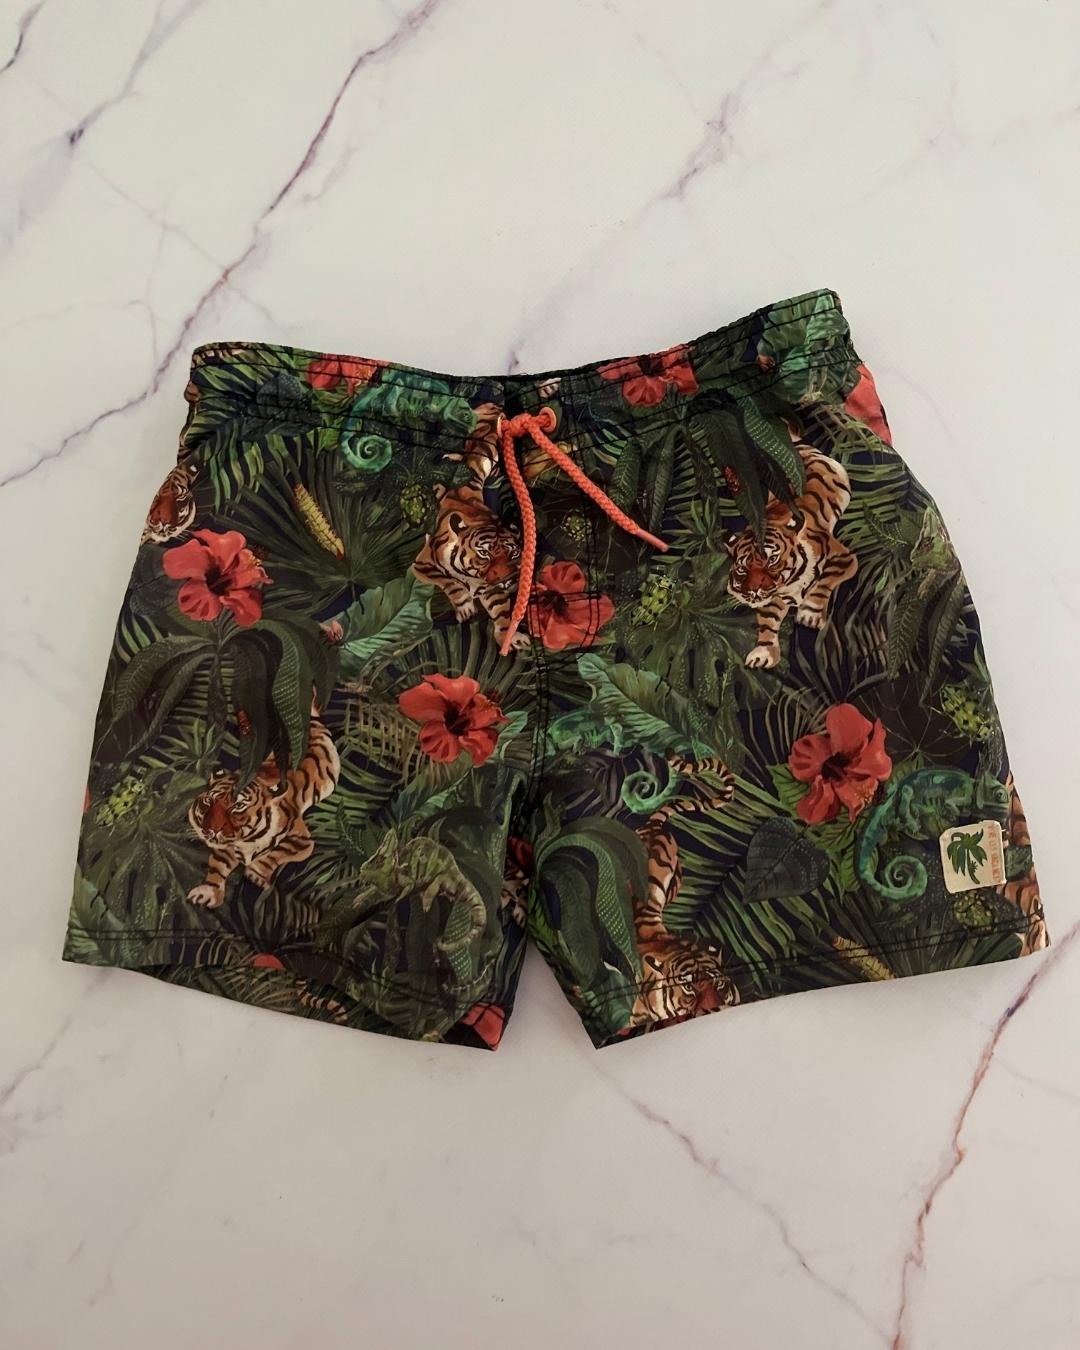 H&M jungle board shorts 4/6Y - Nearly New Kids